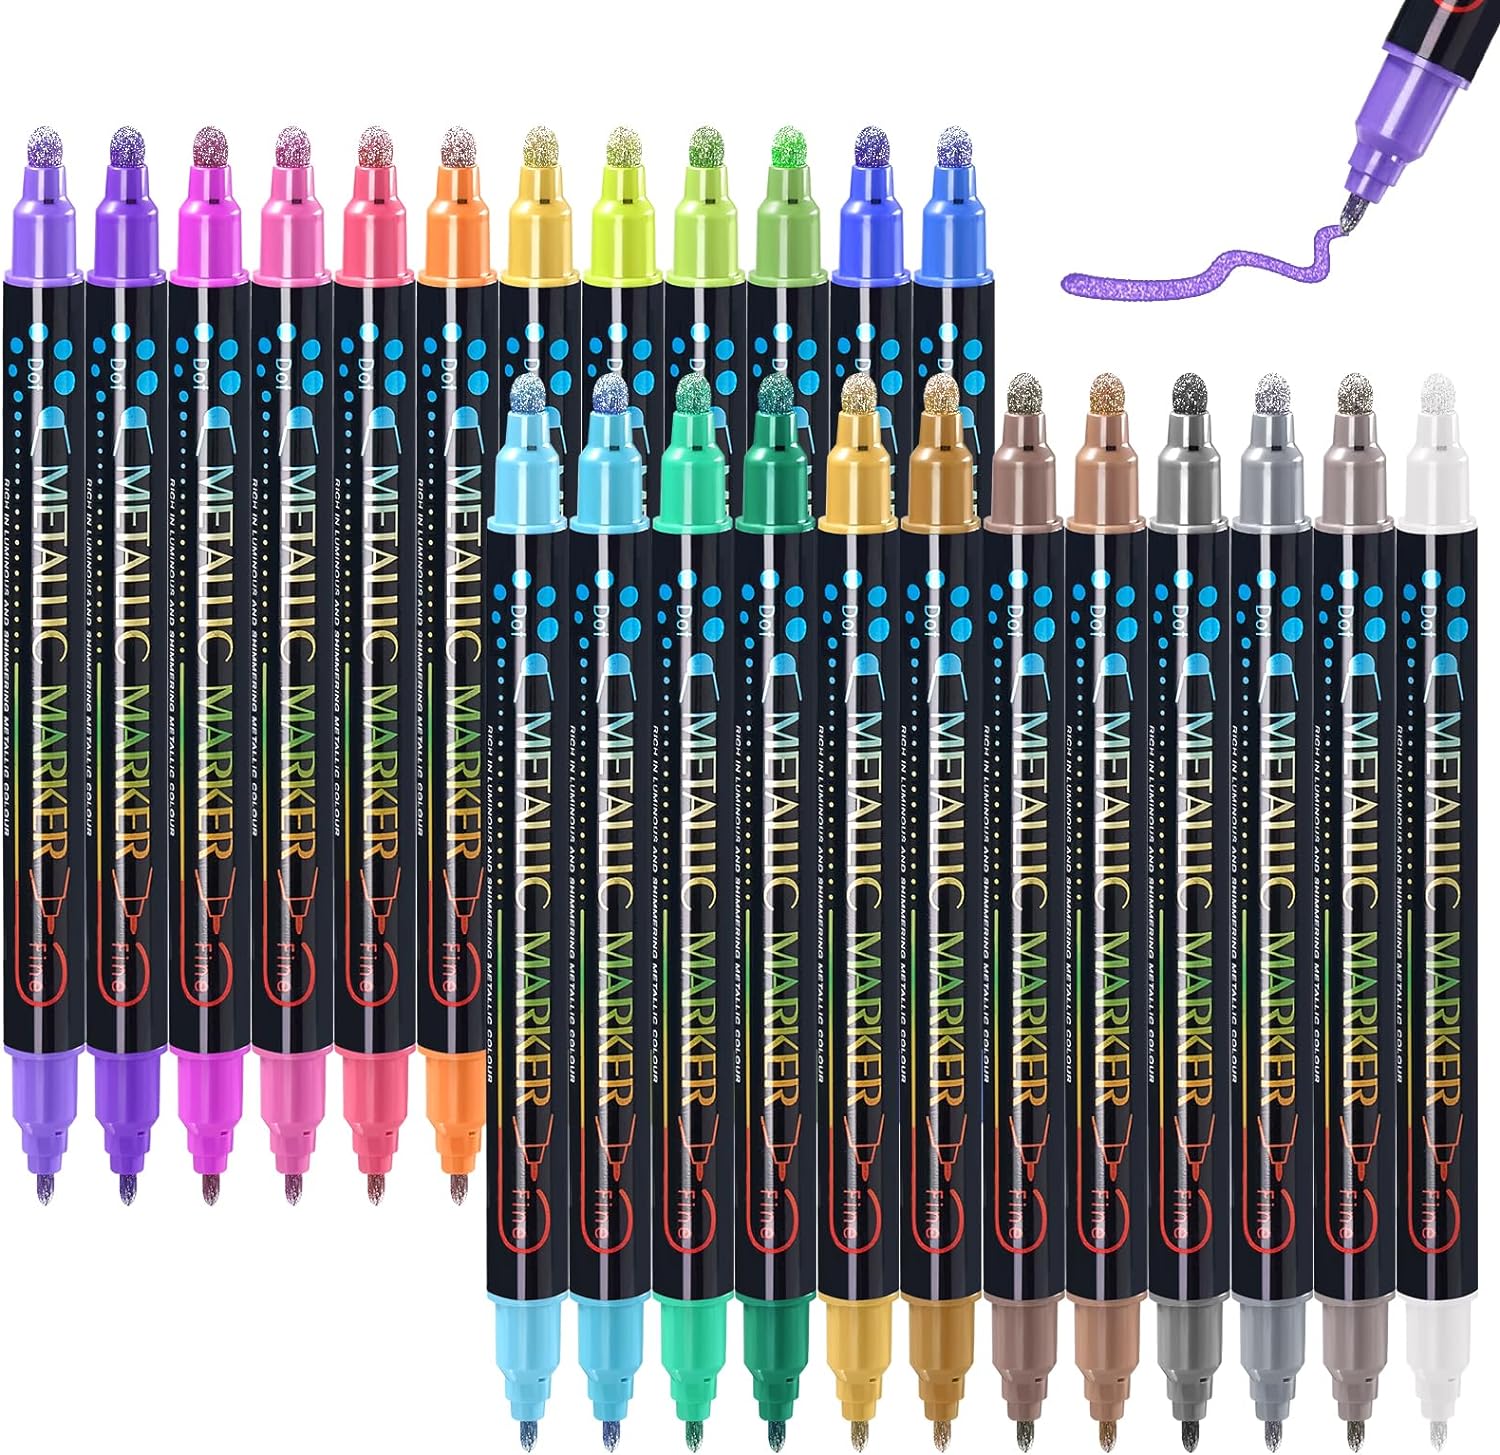 Guangna 12 Colors Metallic Paint Twin Marker Pens with Dot and Fine Tip